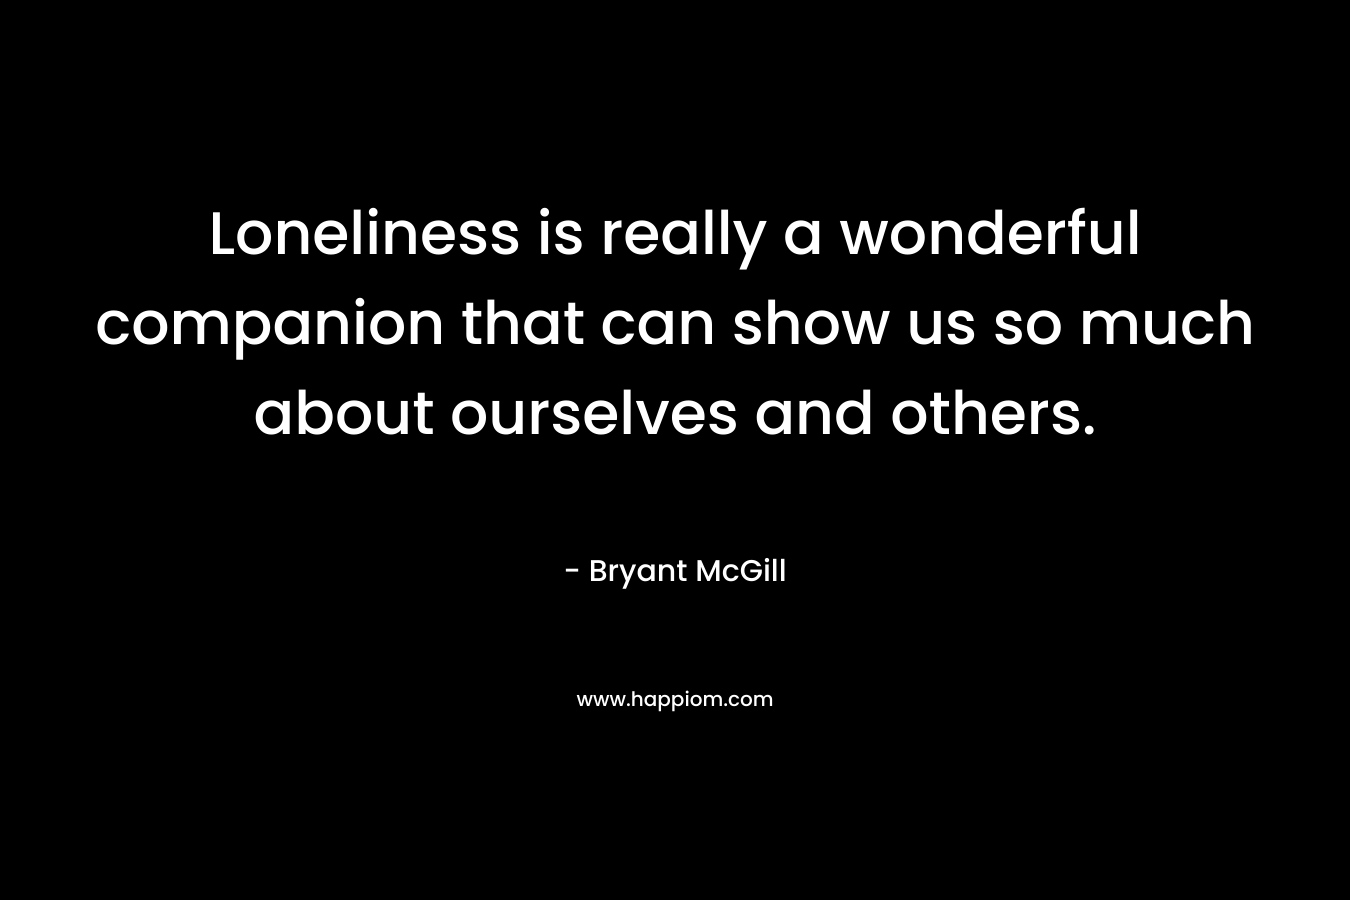 Loneliness is really a wonderful companion that can show us so much about ourselves and others.